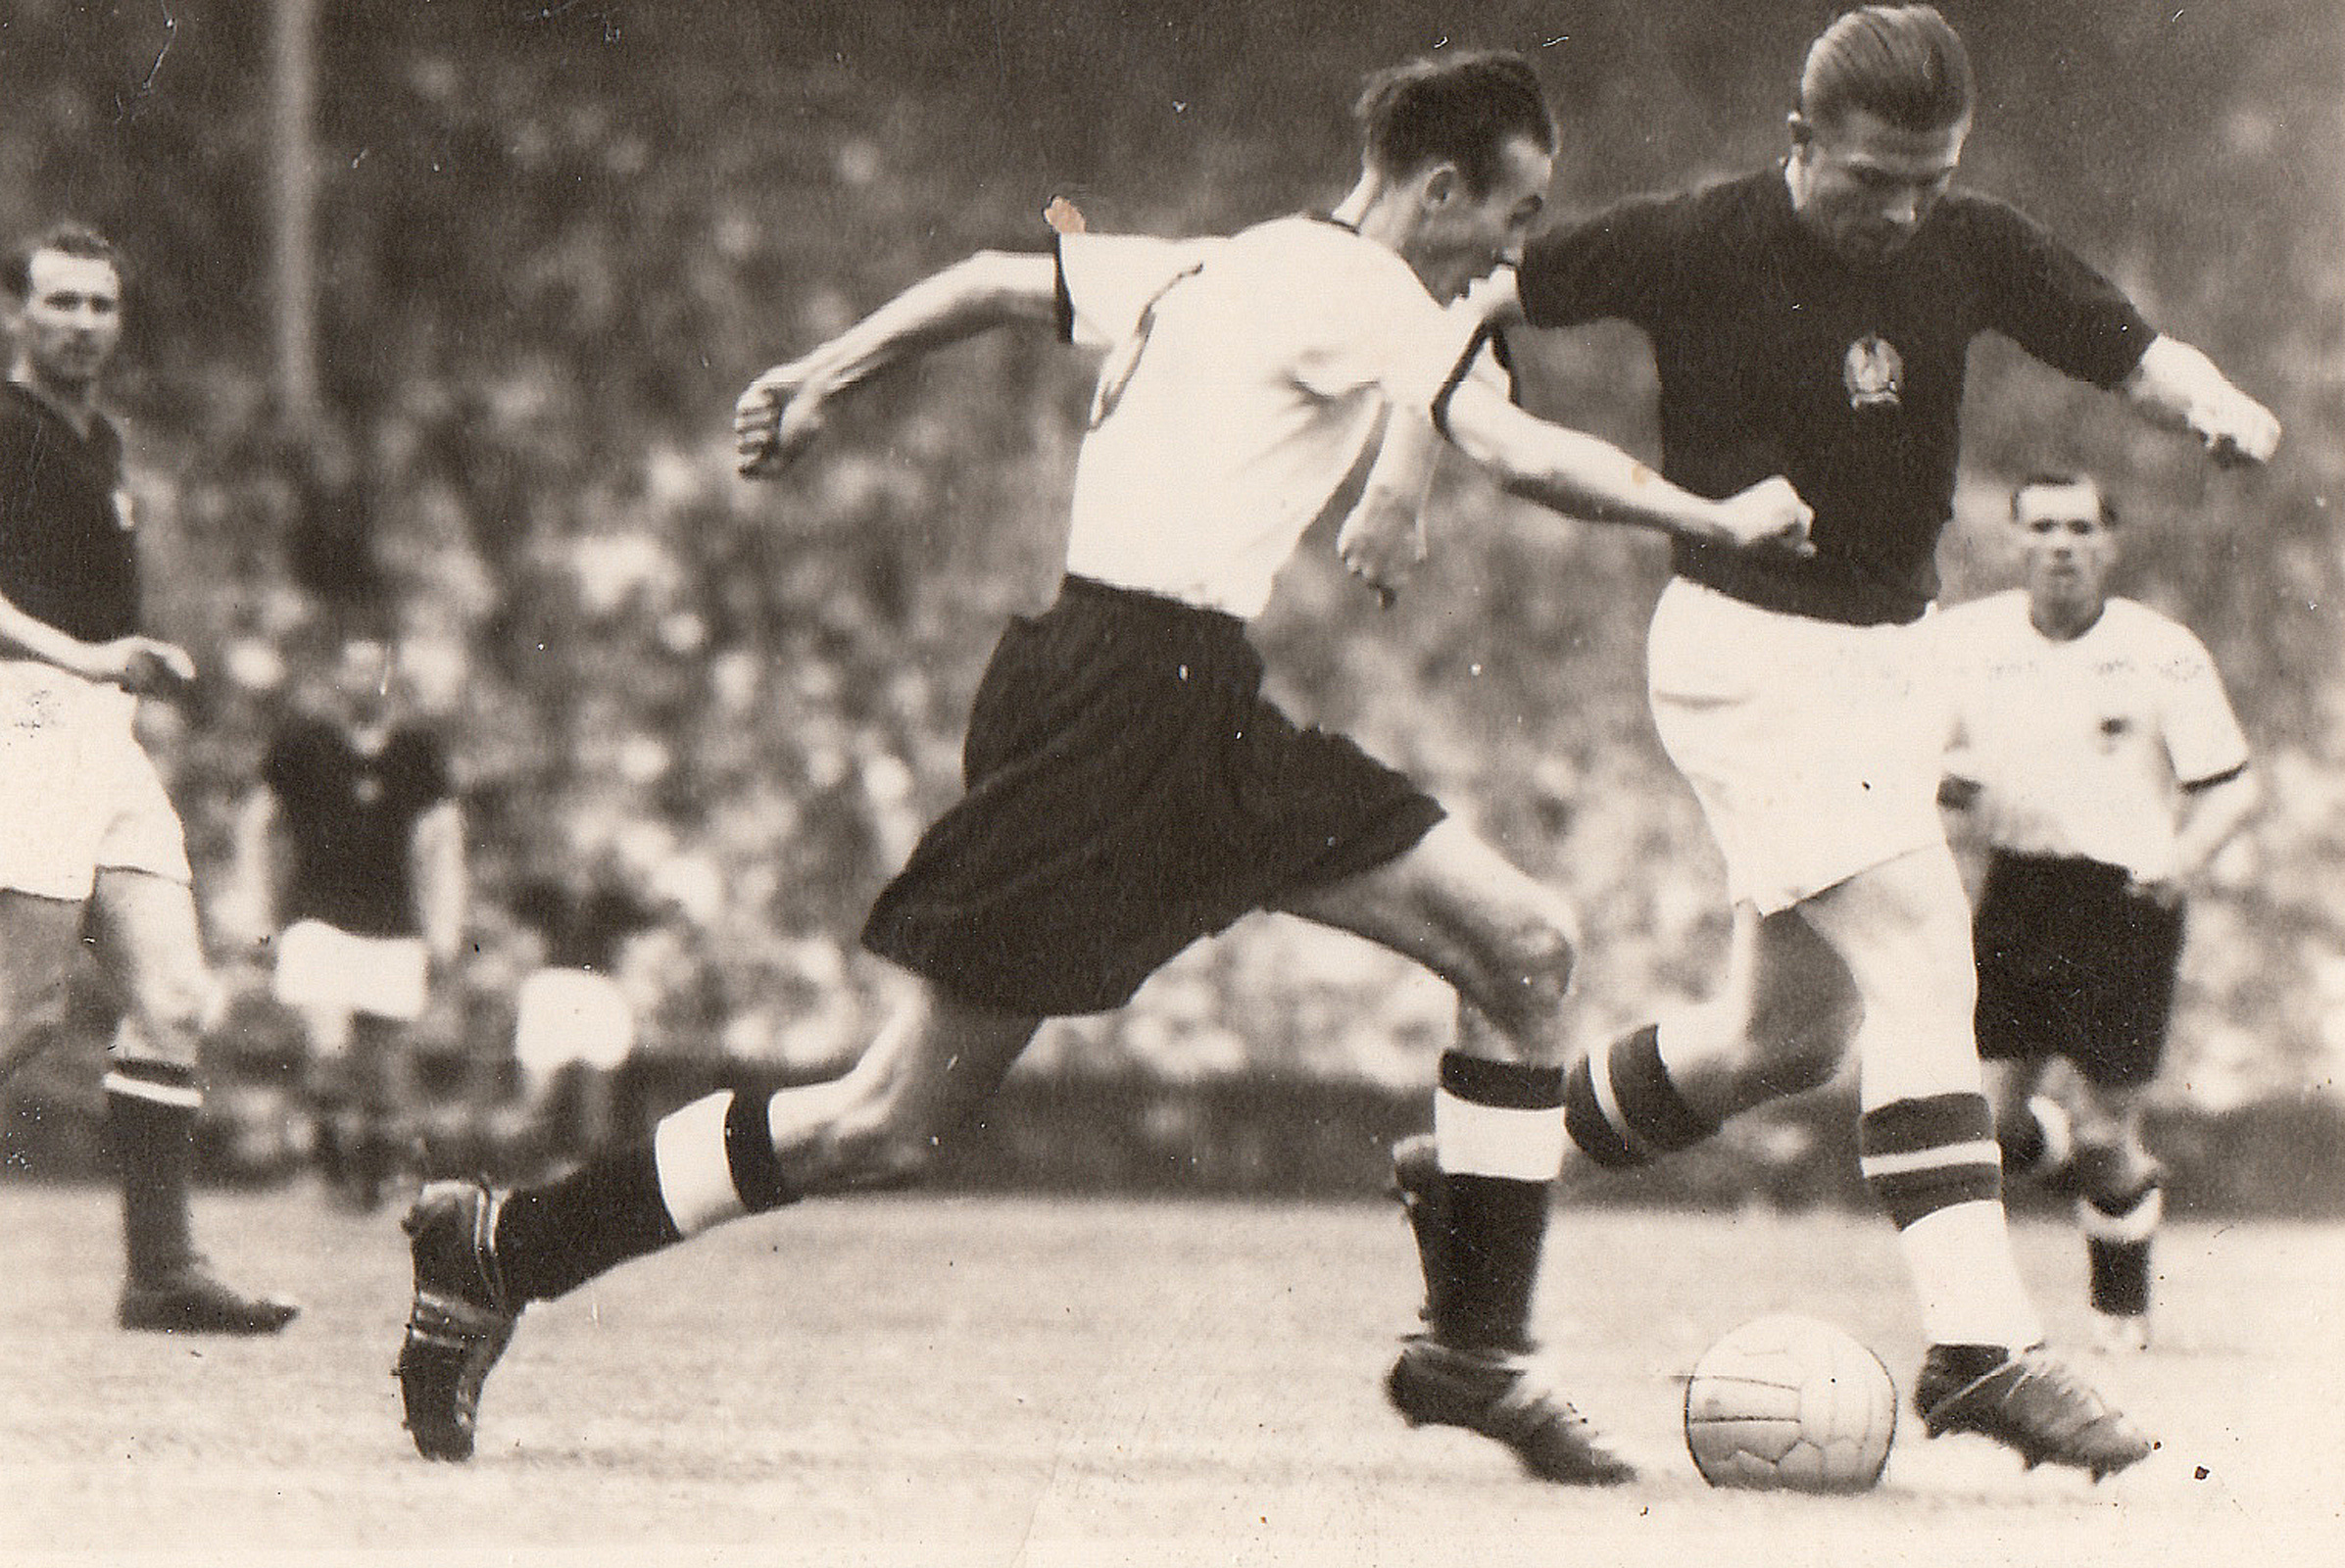 Horst Eckel und Ferenc Puskás in the 1954 World Cup Final.